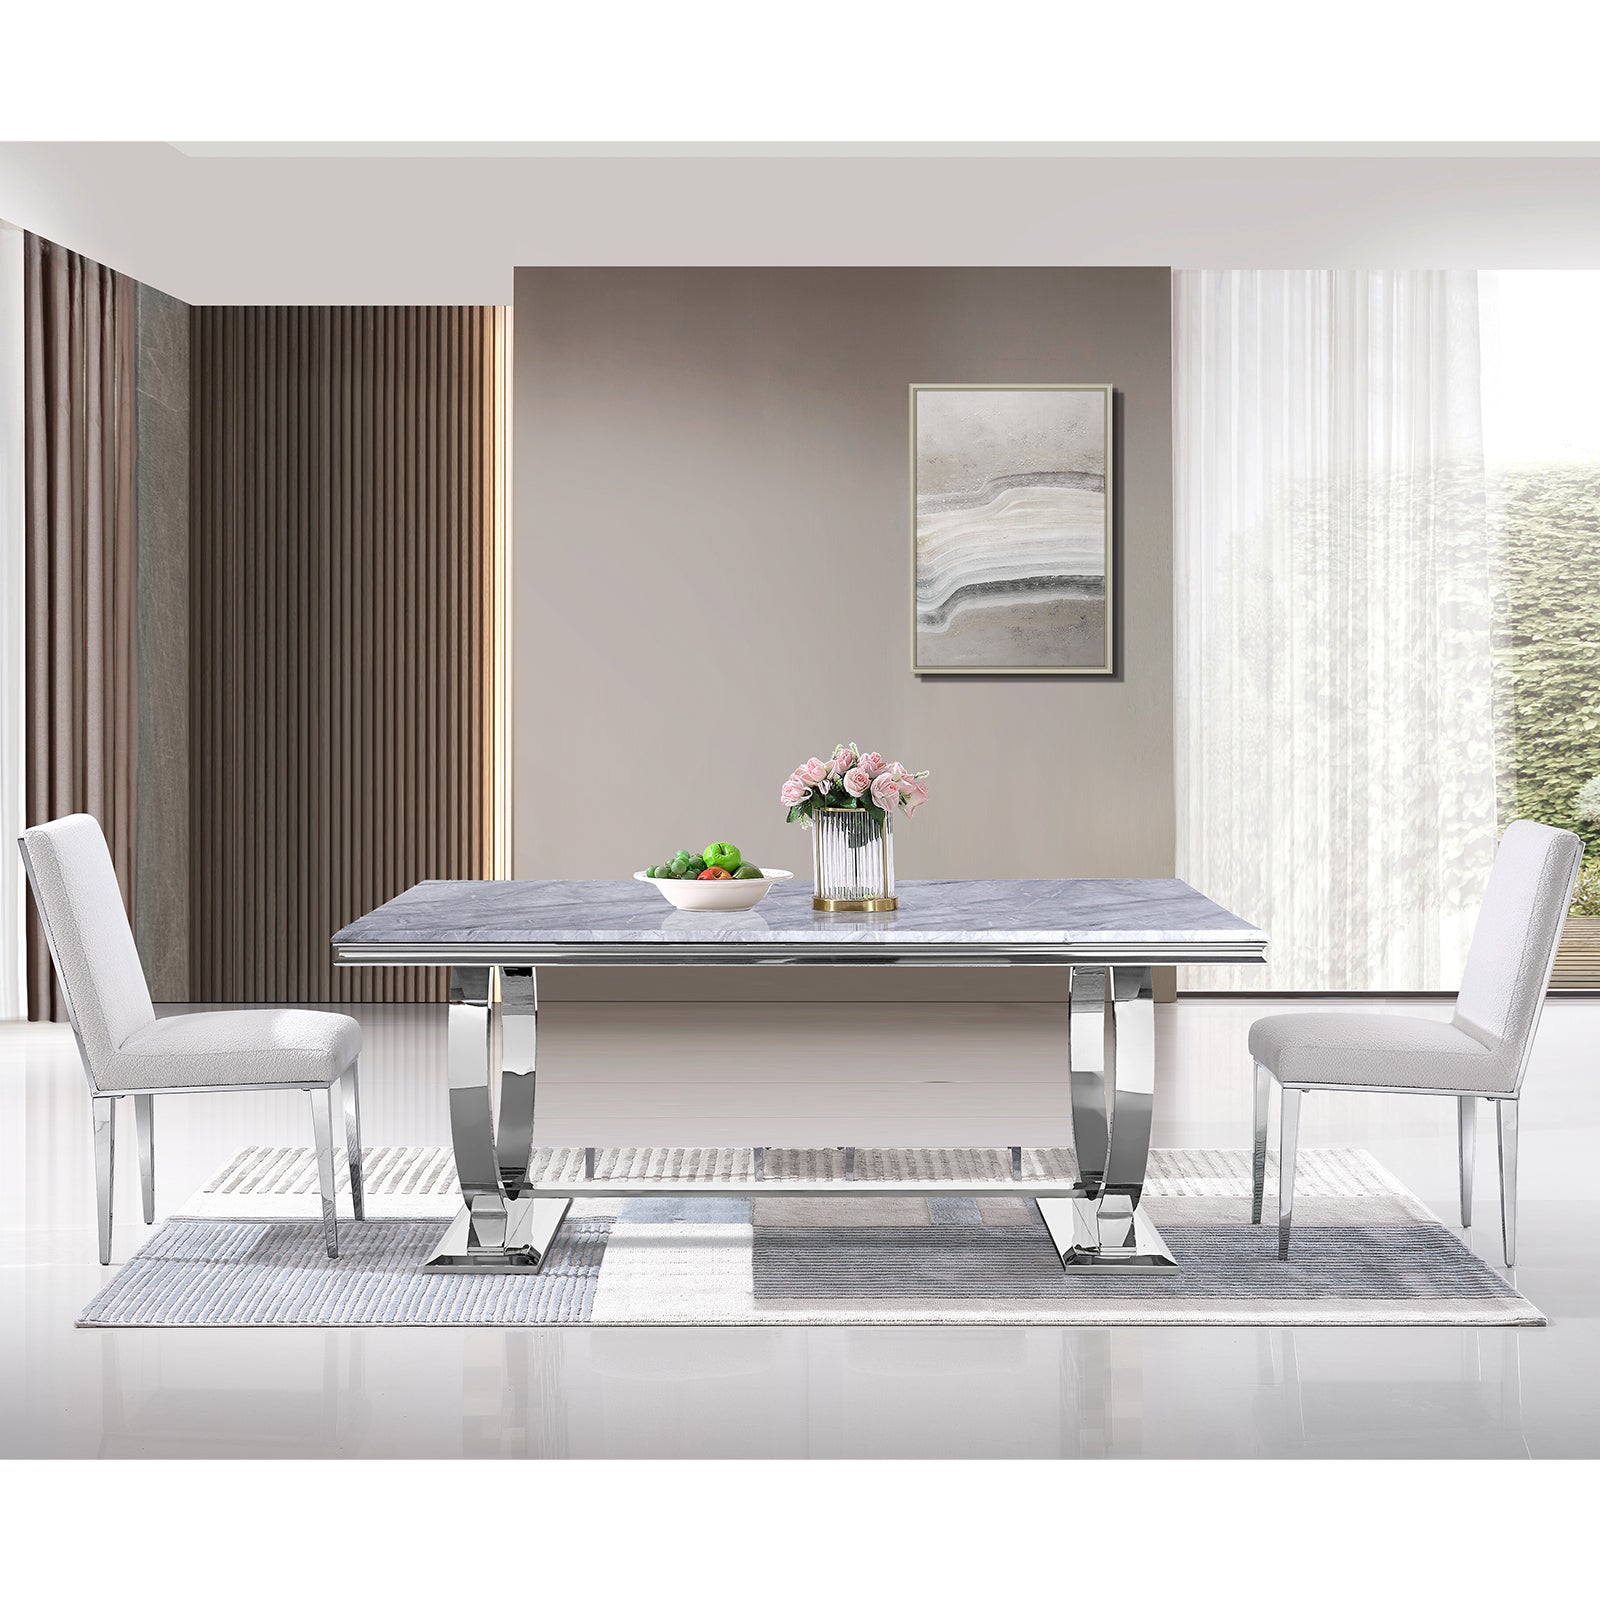 649-Set | AUZ White and Silver  Dining room Sets for 6